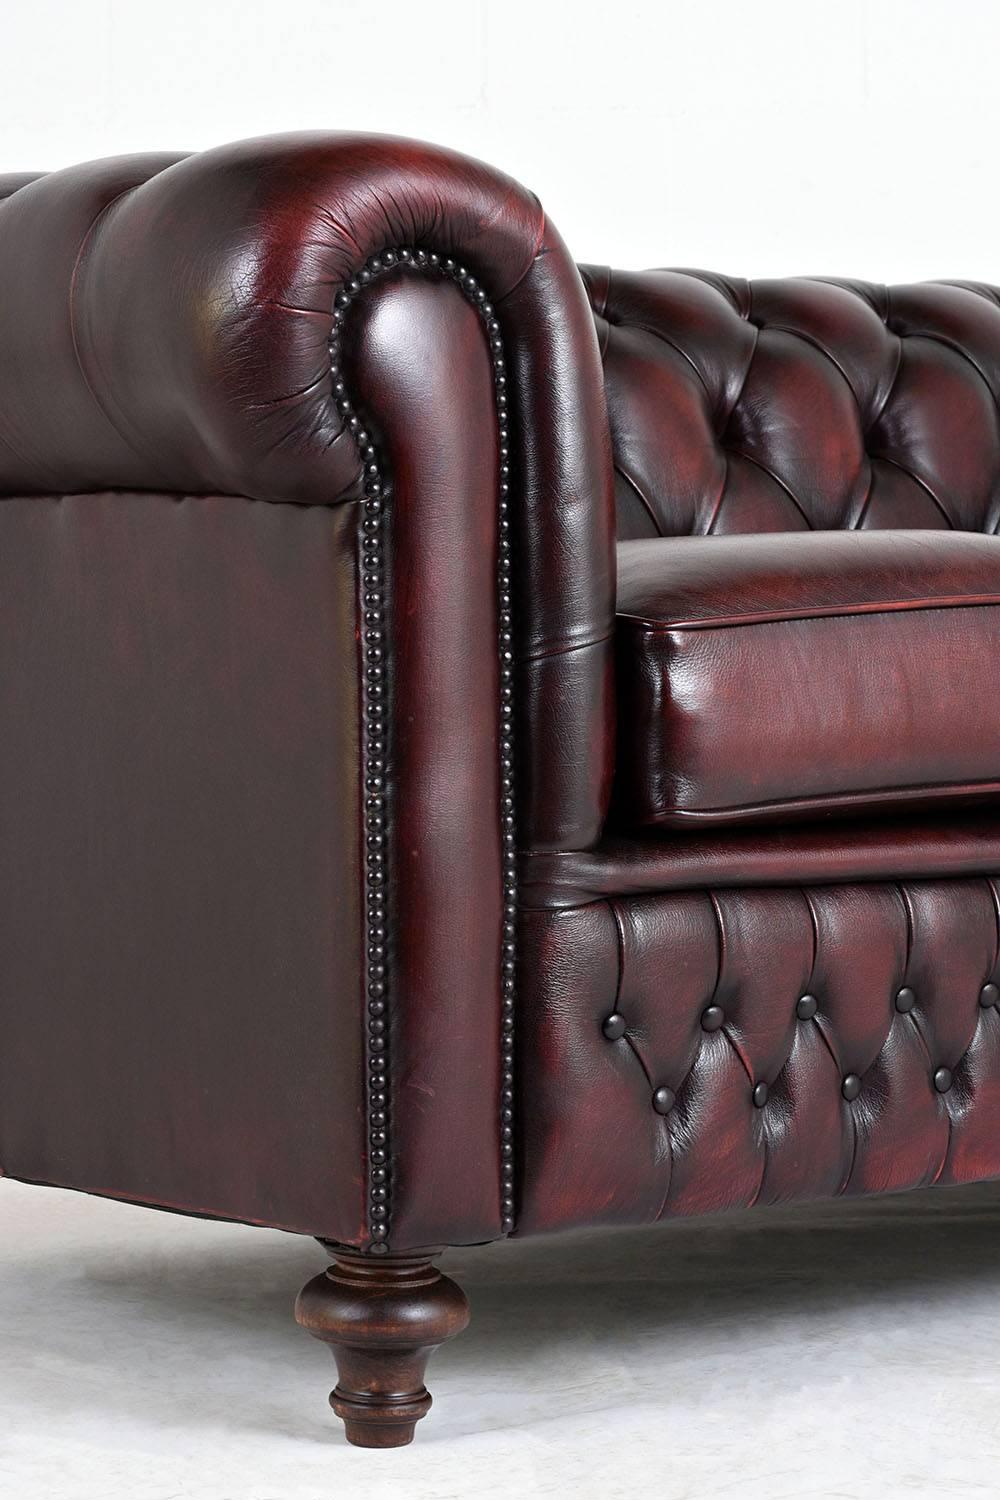 20th Century Vintage Chesterfield-Style Tufted Leather Sofa